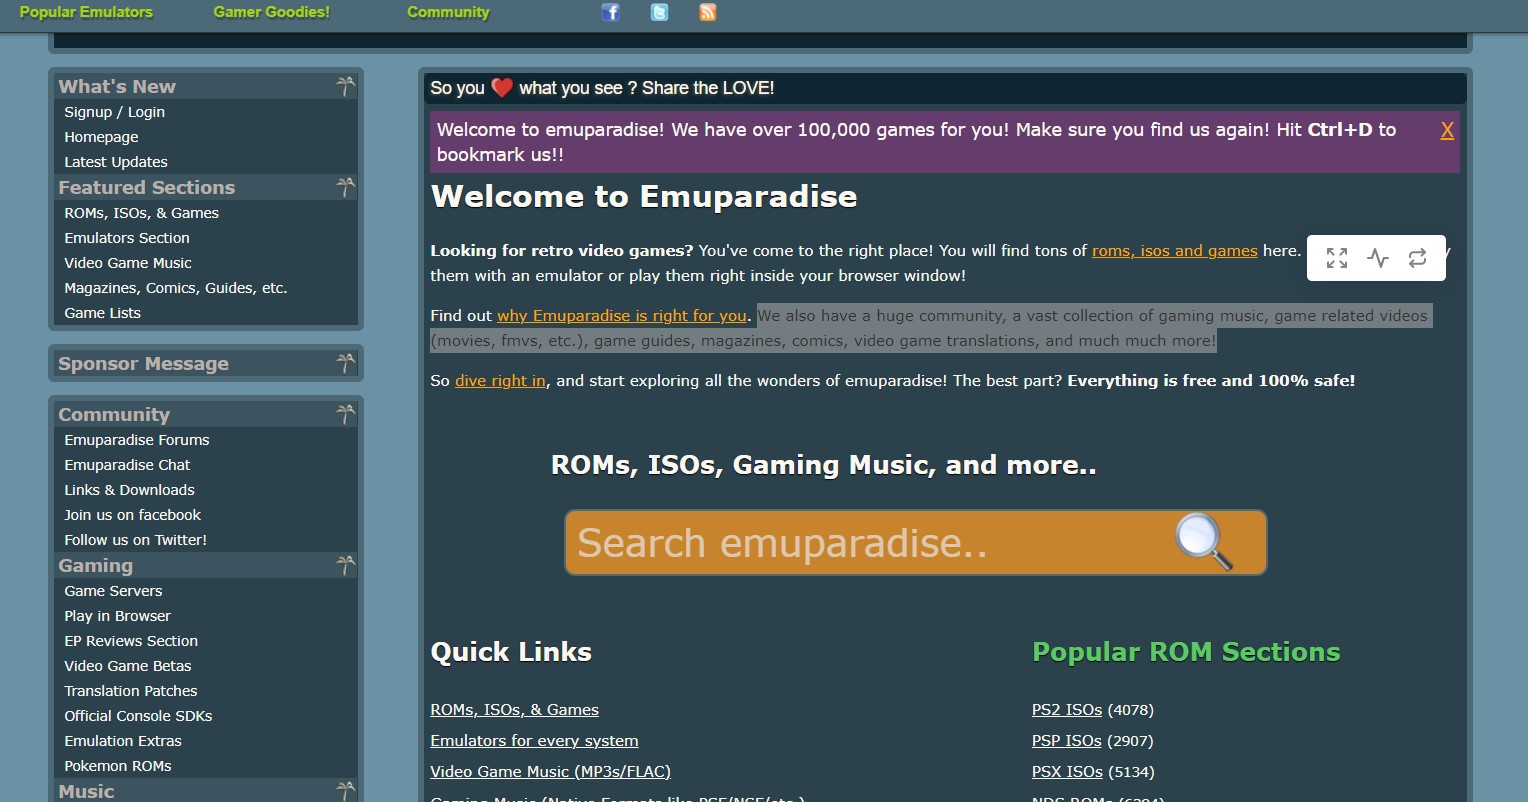 Find detailed information about Emuparadise